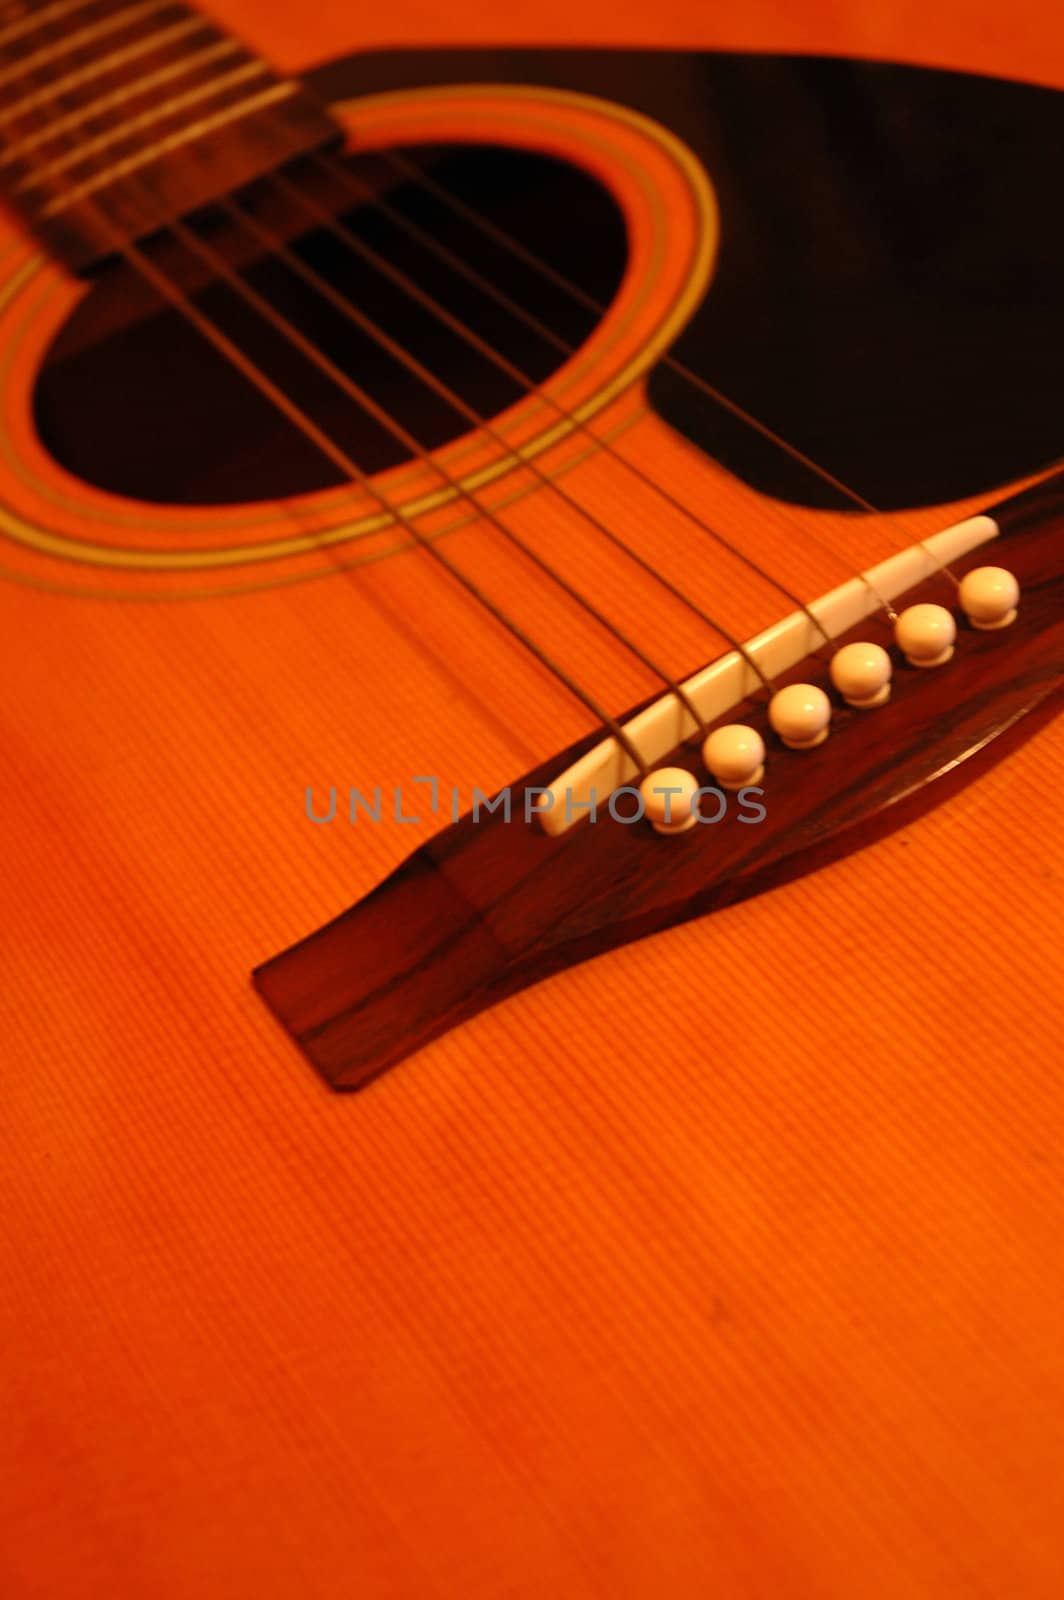 A detail of a wooden spanish guitar